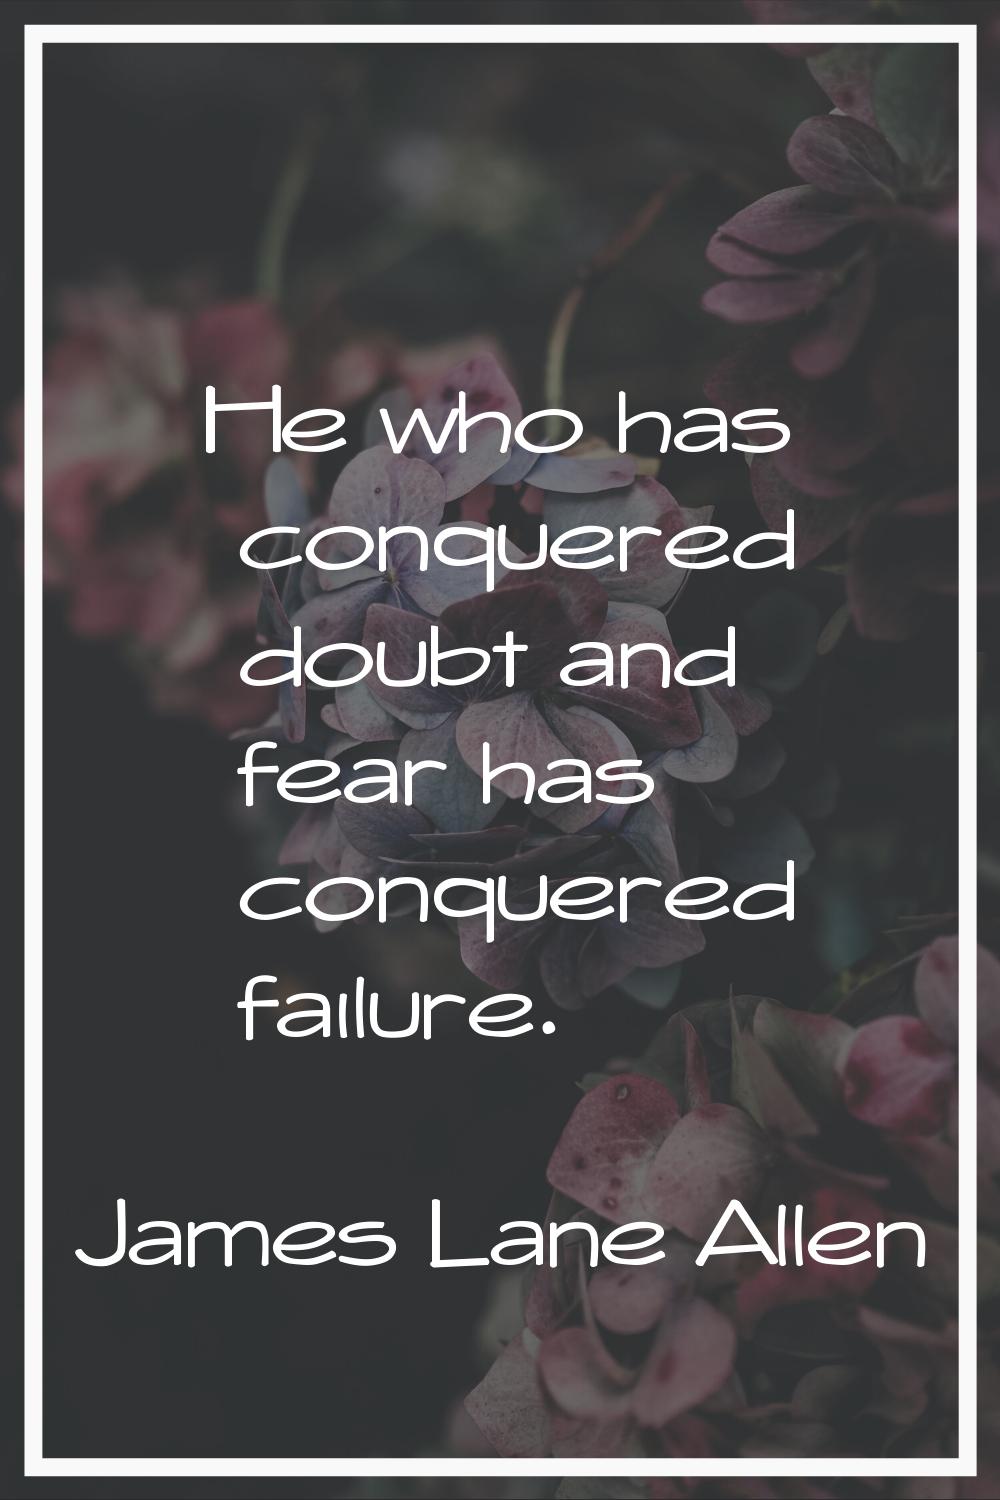 He who has conquered doubt and fear has conquered failure.